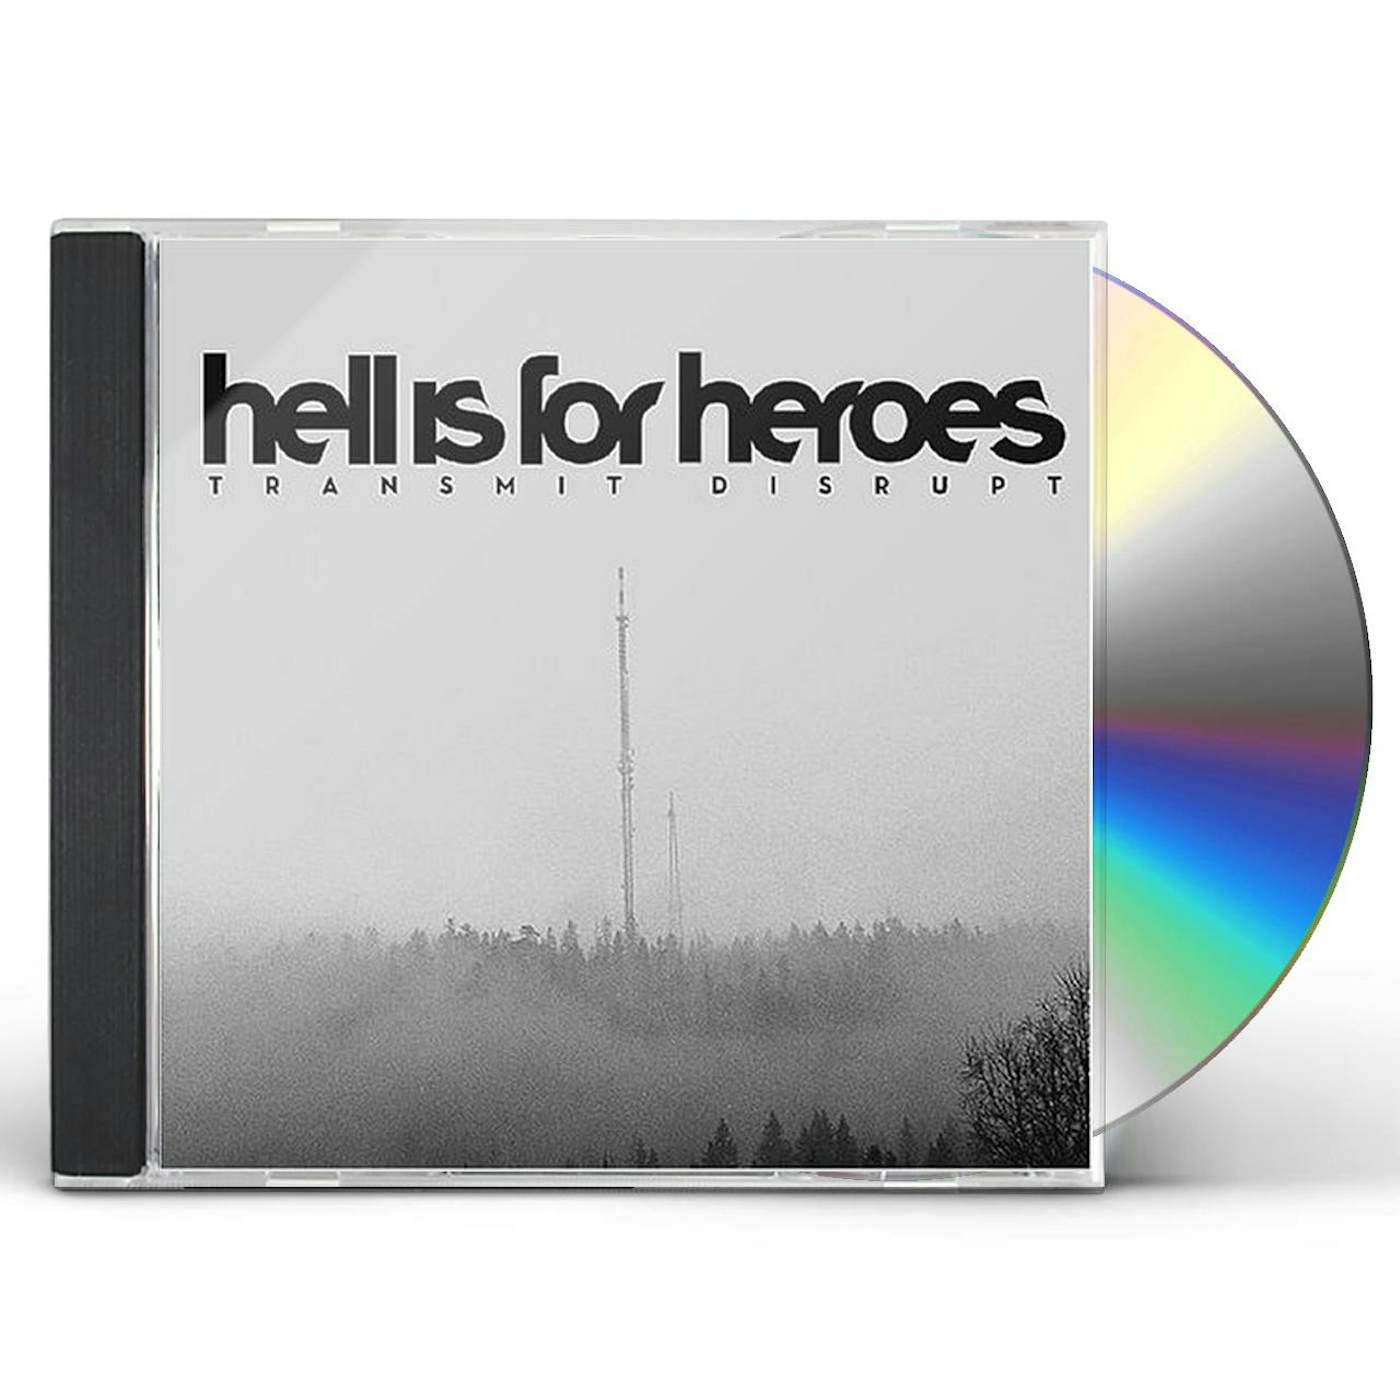 Hell Is For Heroes TRANSMIT DISRUPT CD